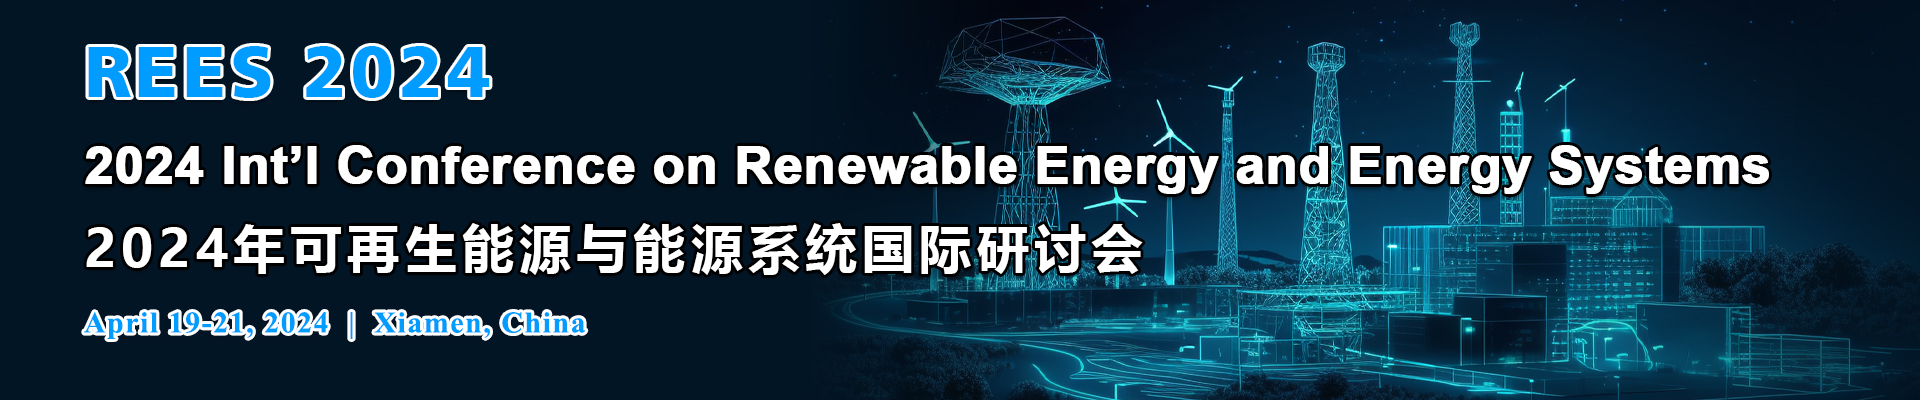 2024 Int’l Conference on Renewable Energy and Energy Systems (REES 2024), Xiamen, Fujian, China